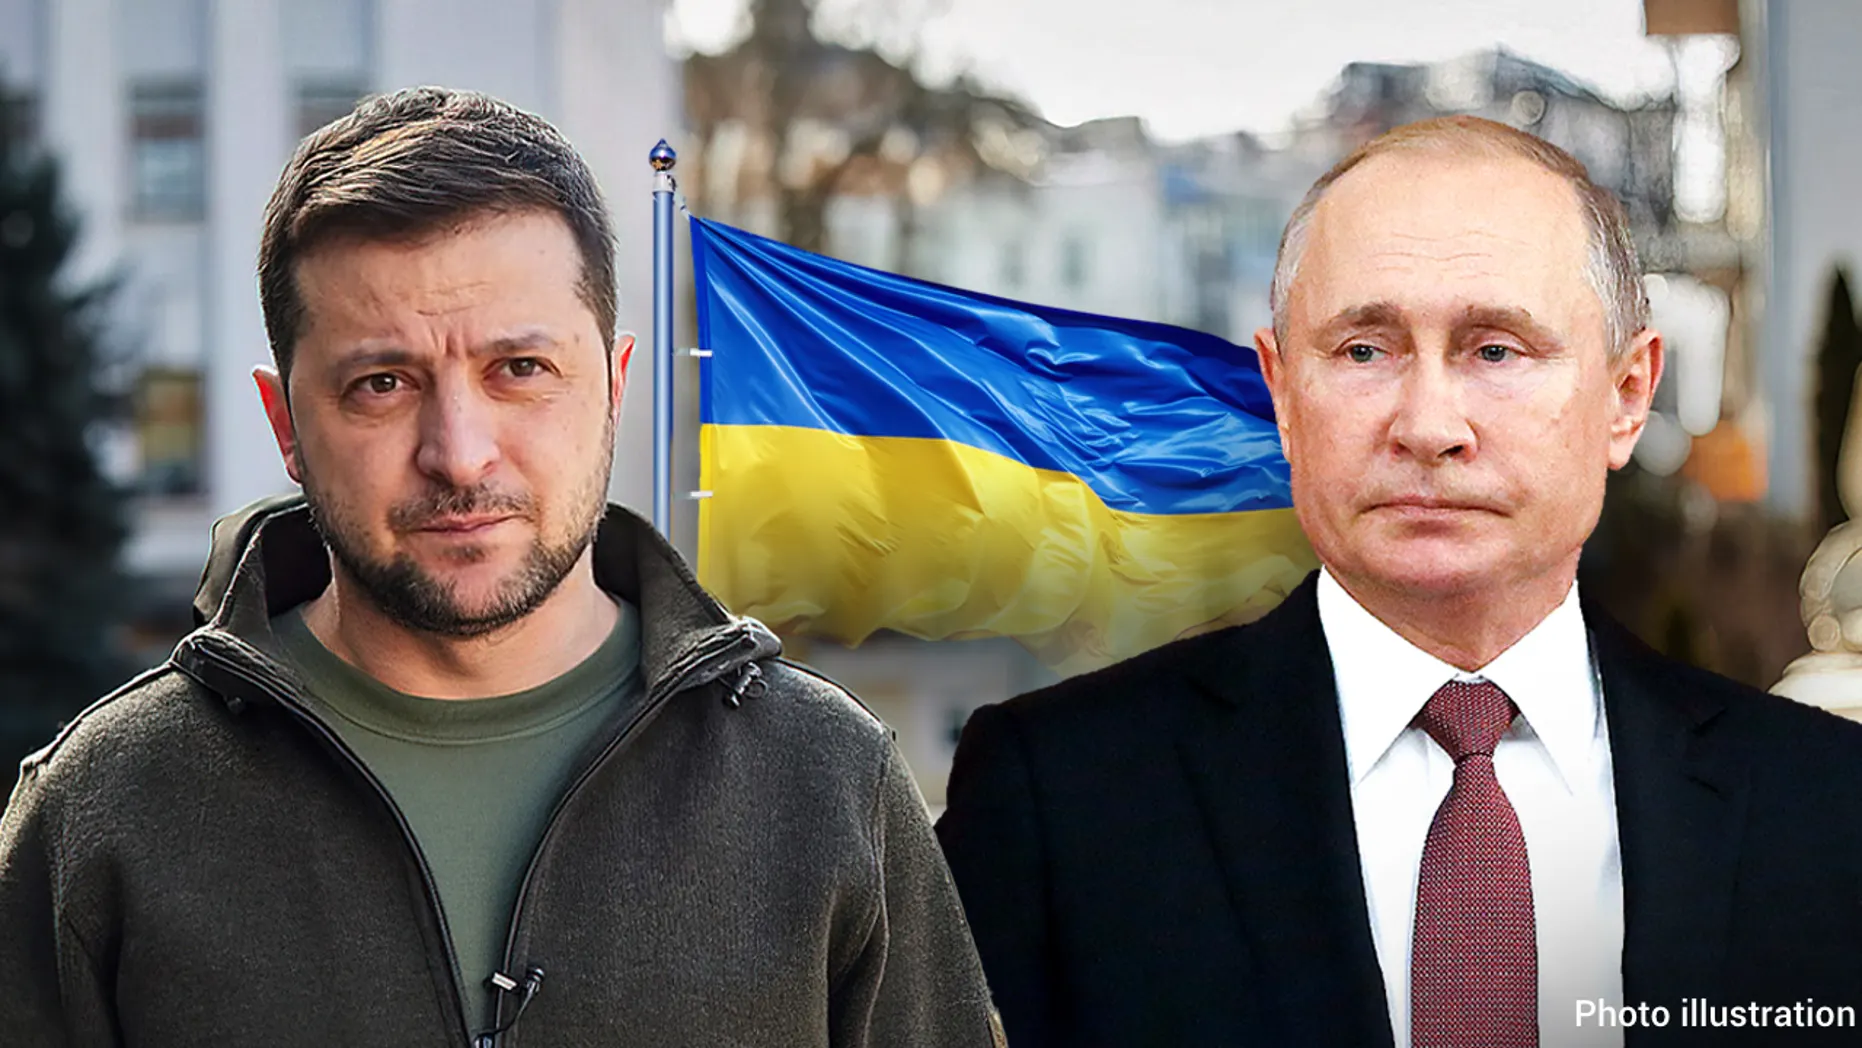 Zelenskyy pleads with France, Germany to help free captured mayor: ‘I’ll talk to whoever I need to talk to’